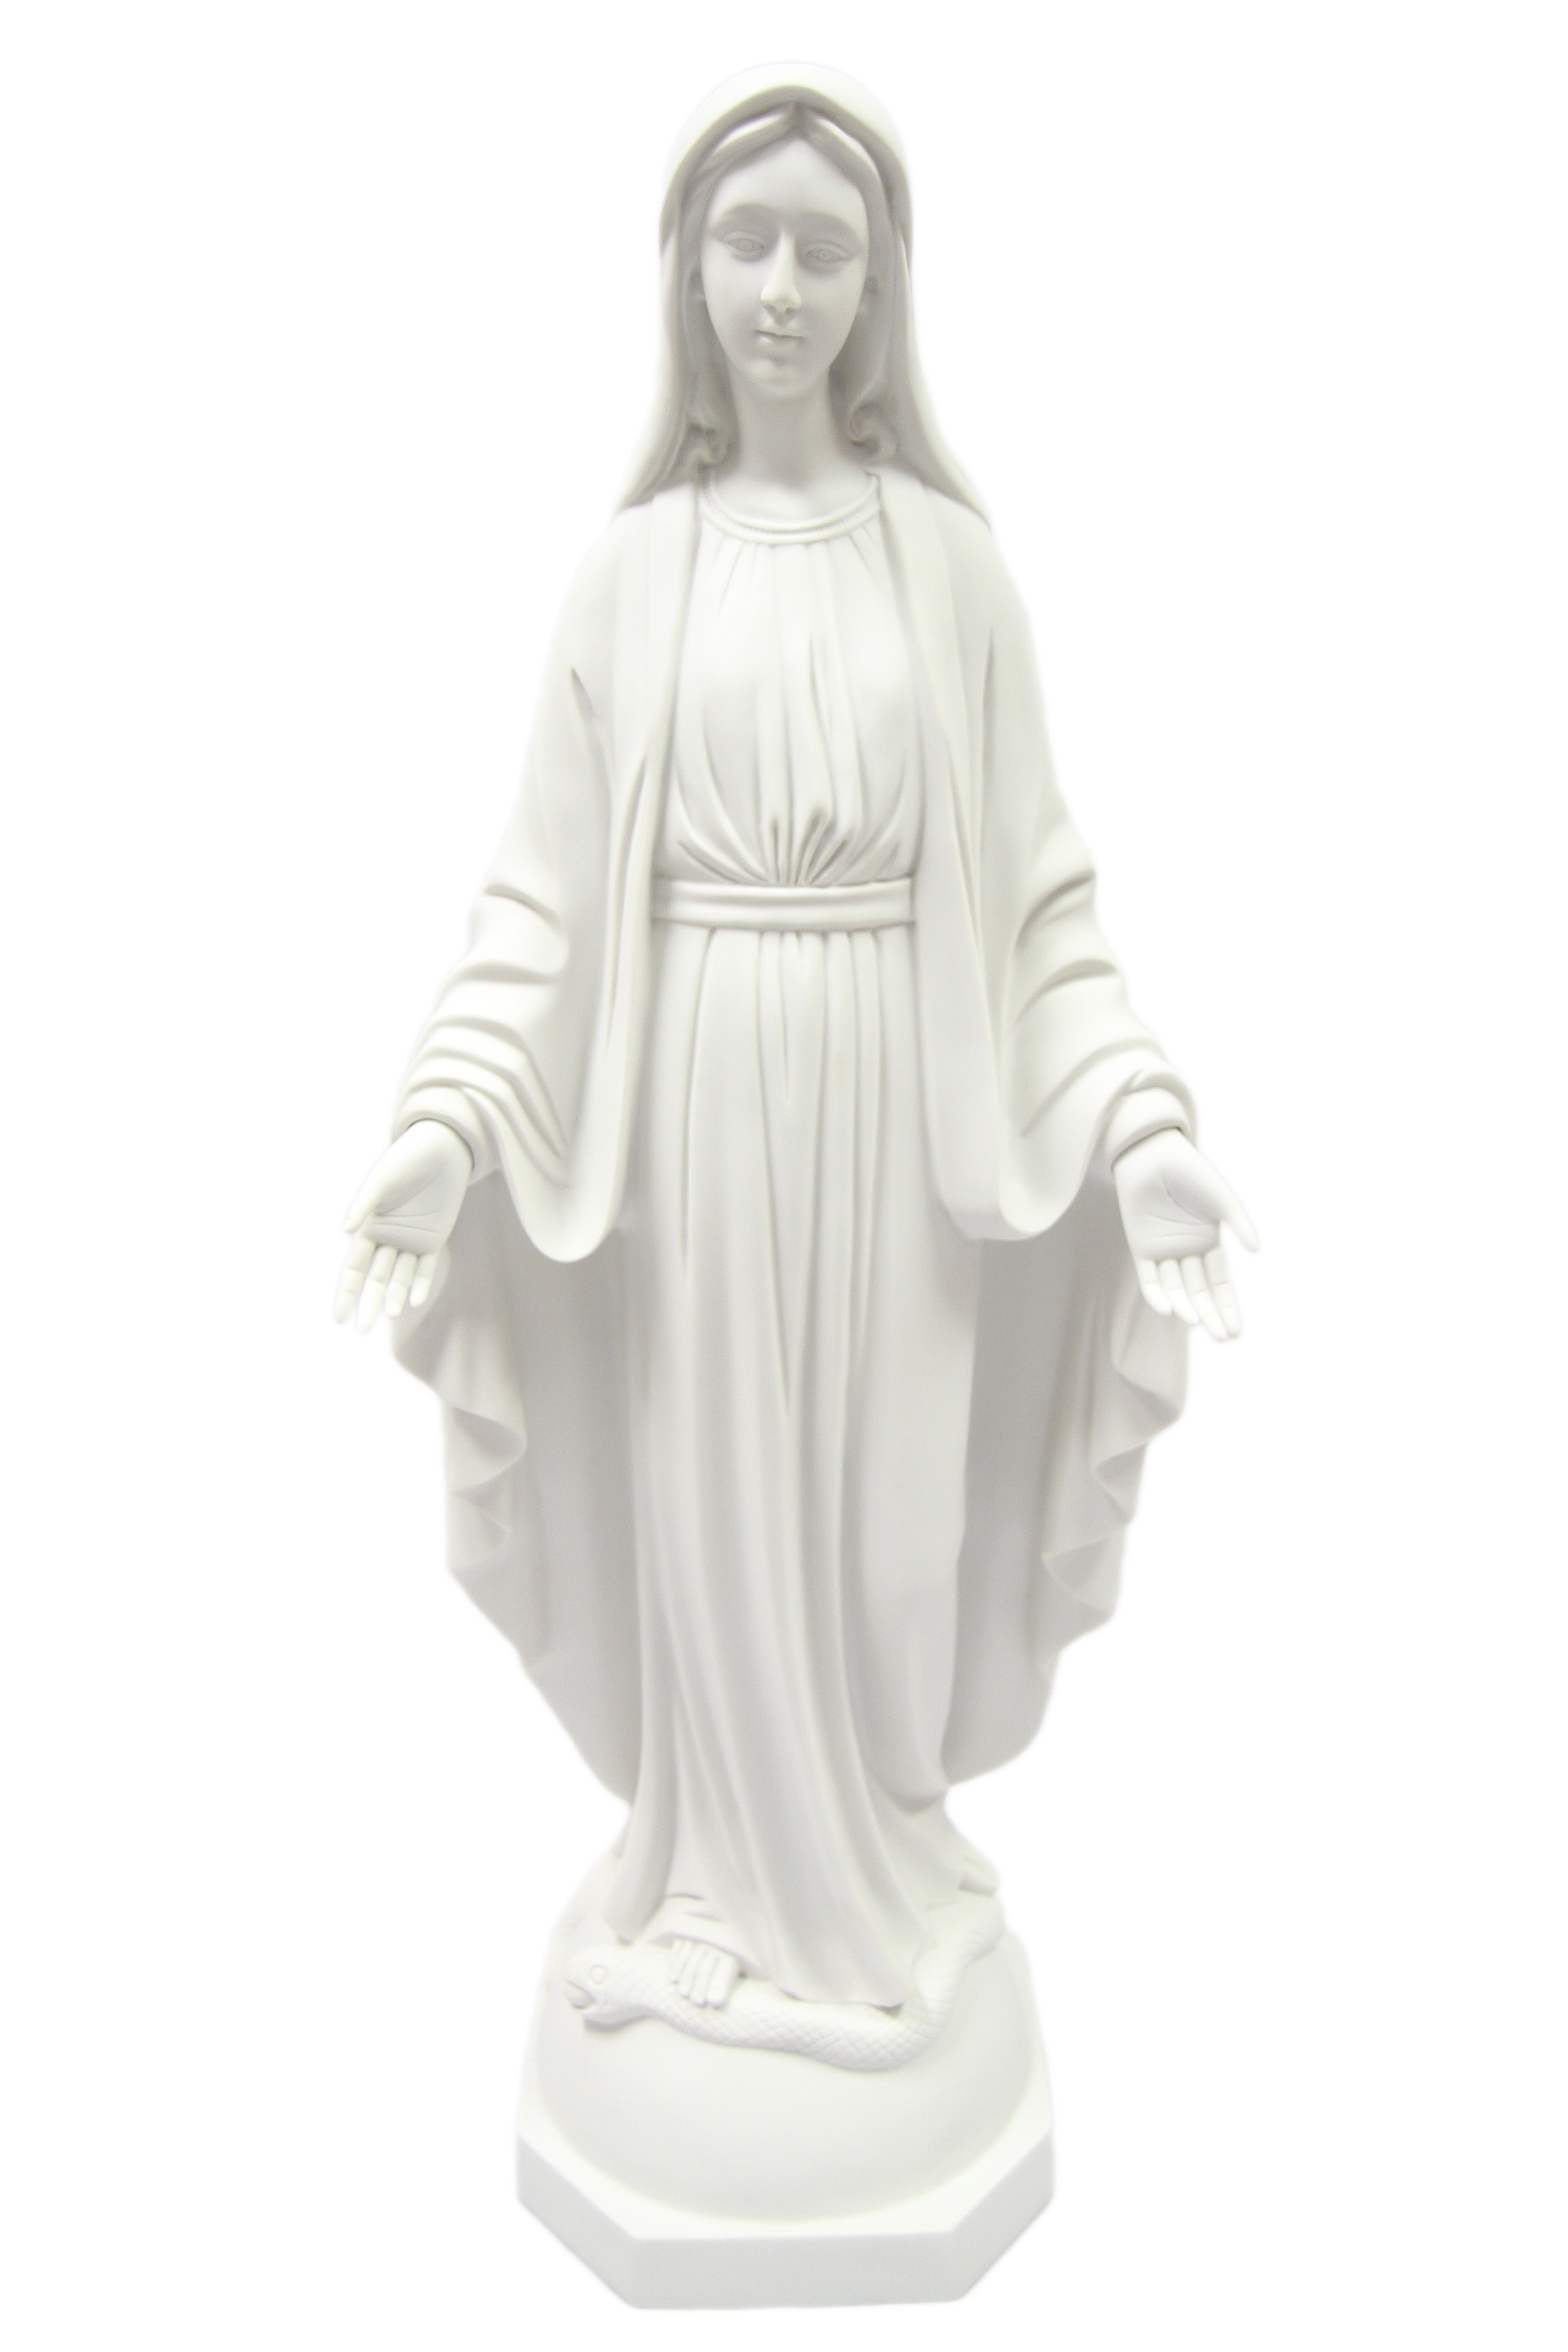 31 Inch Our Lady of Grace Virgin Mary Catholic Statue Vittoria Collection Made in Italy